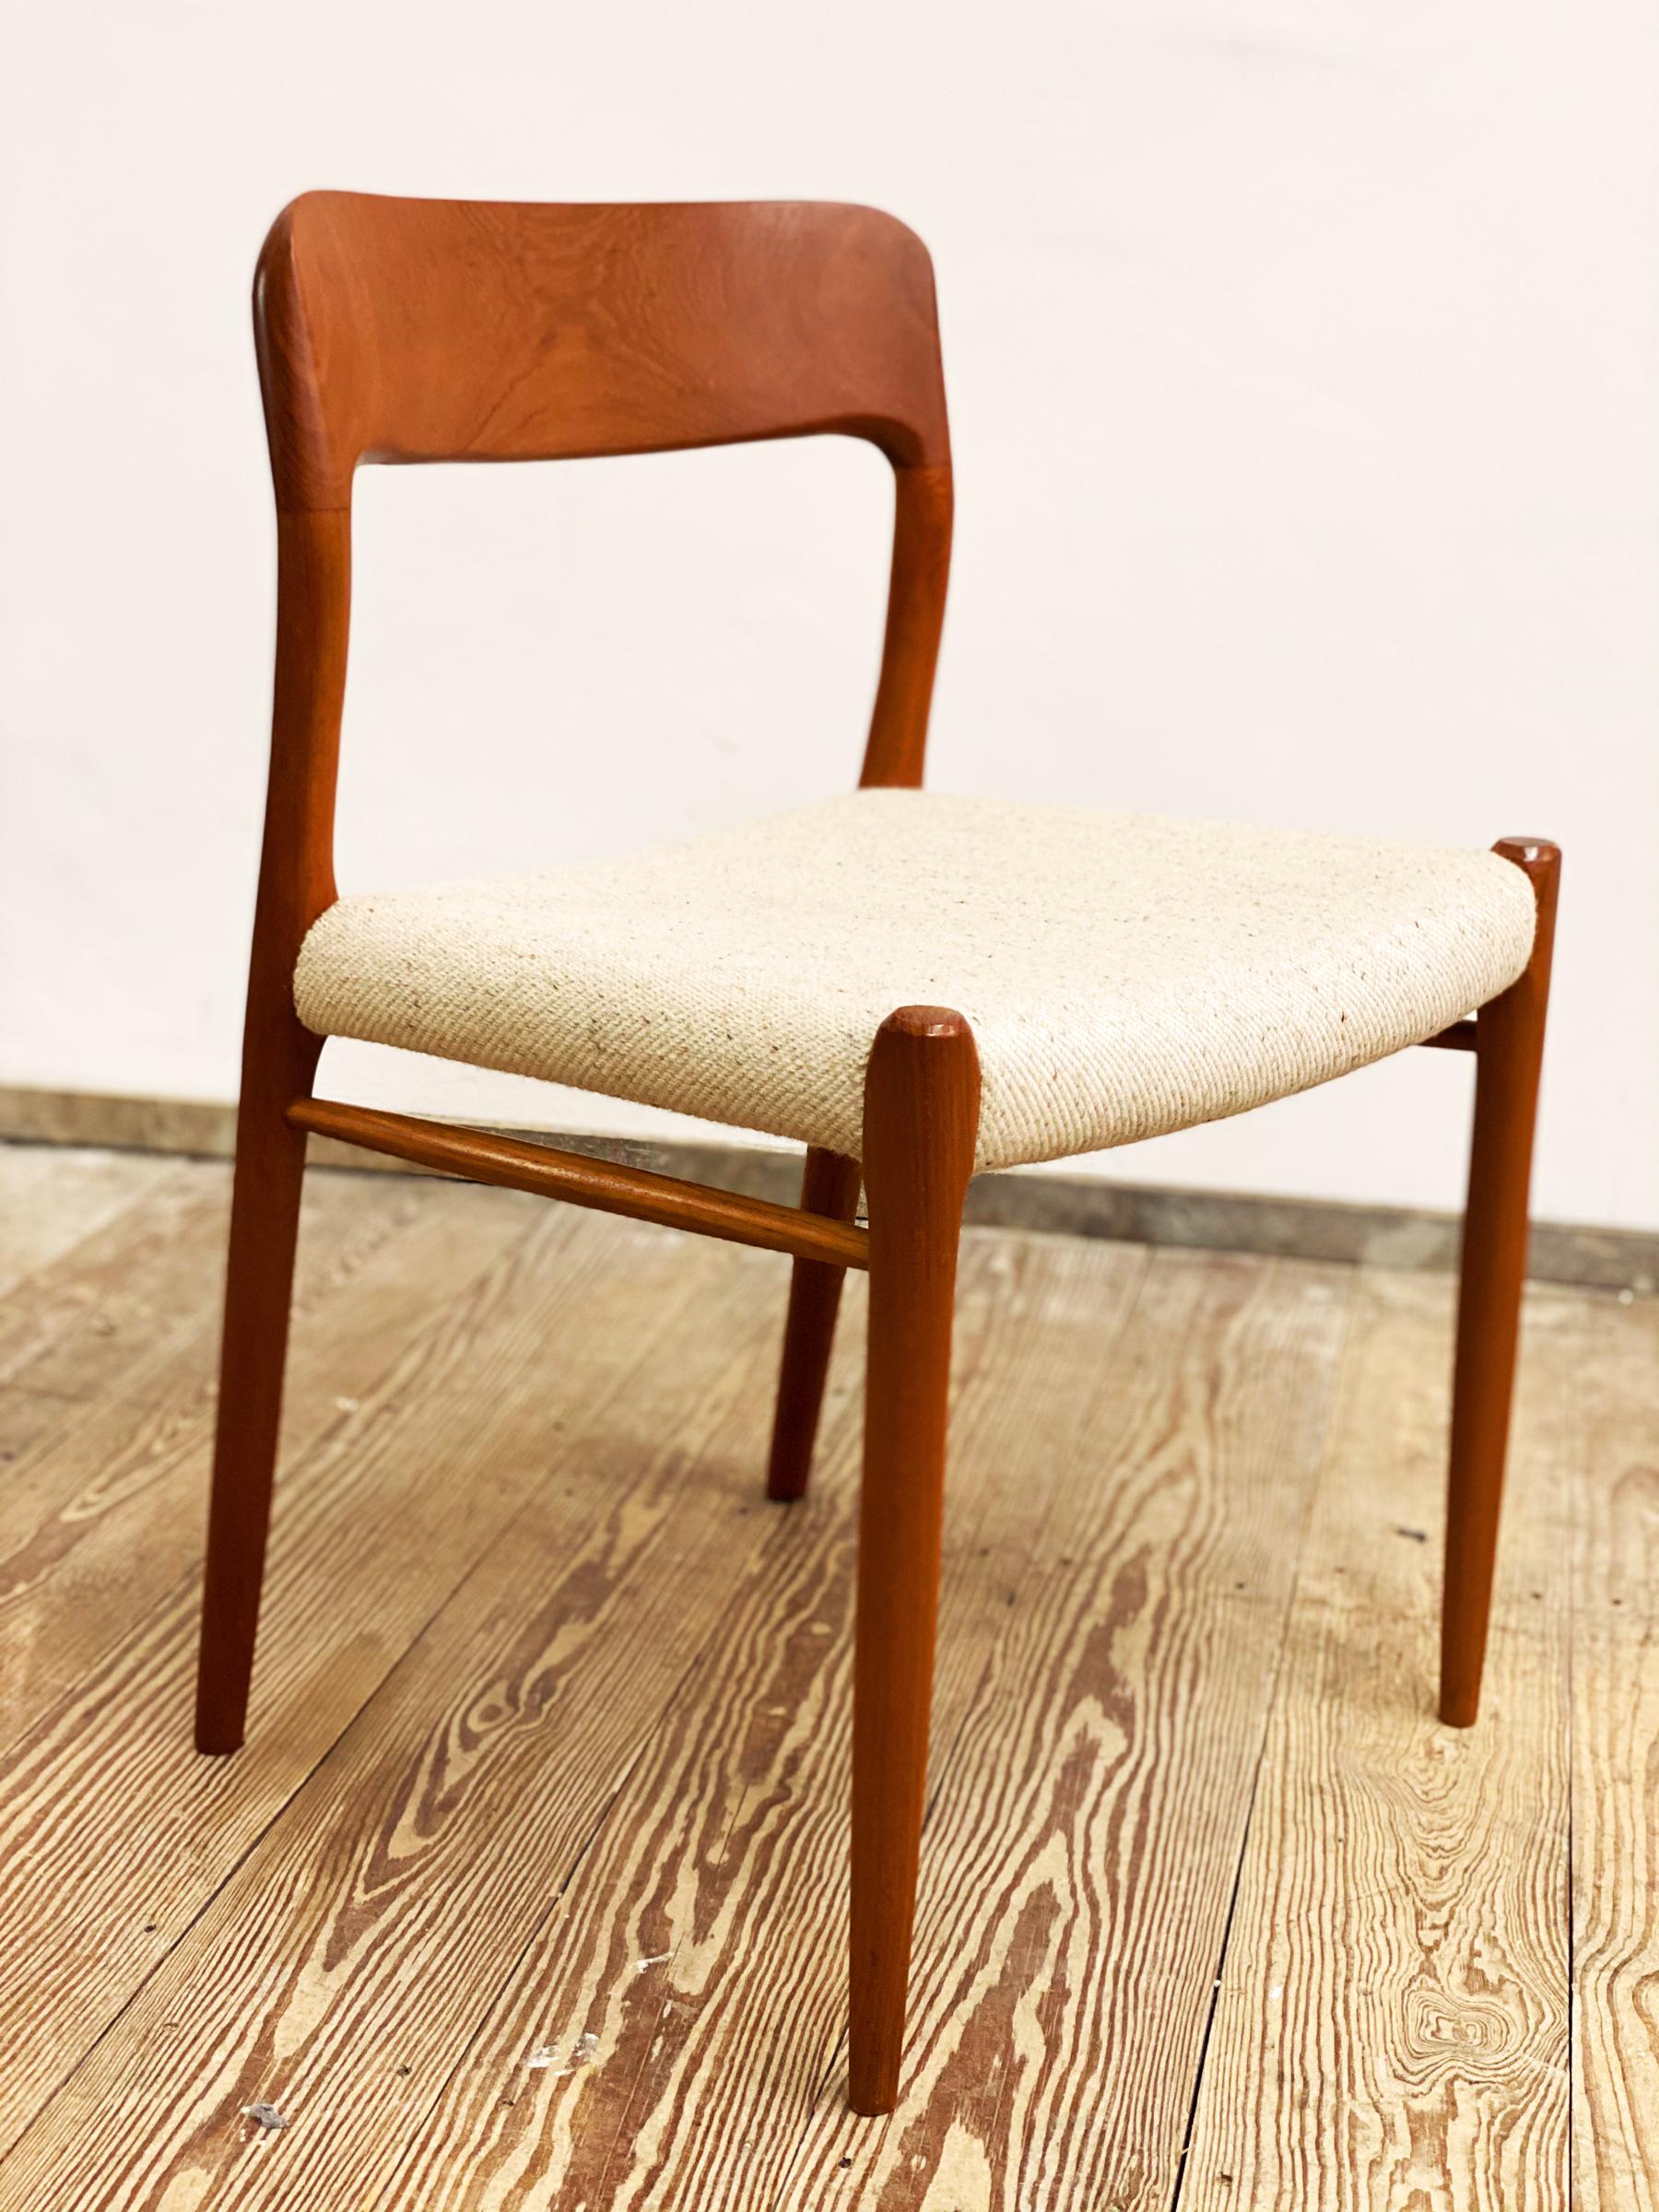 Mid-20th Century Mid-Century Teak Dining or Side Chair #75 by Niels O. Møller for J. L. Moller